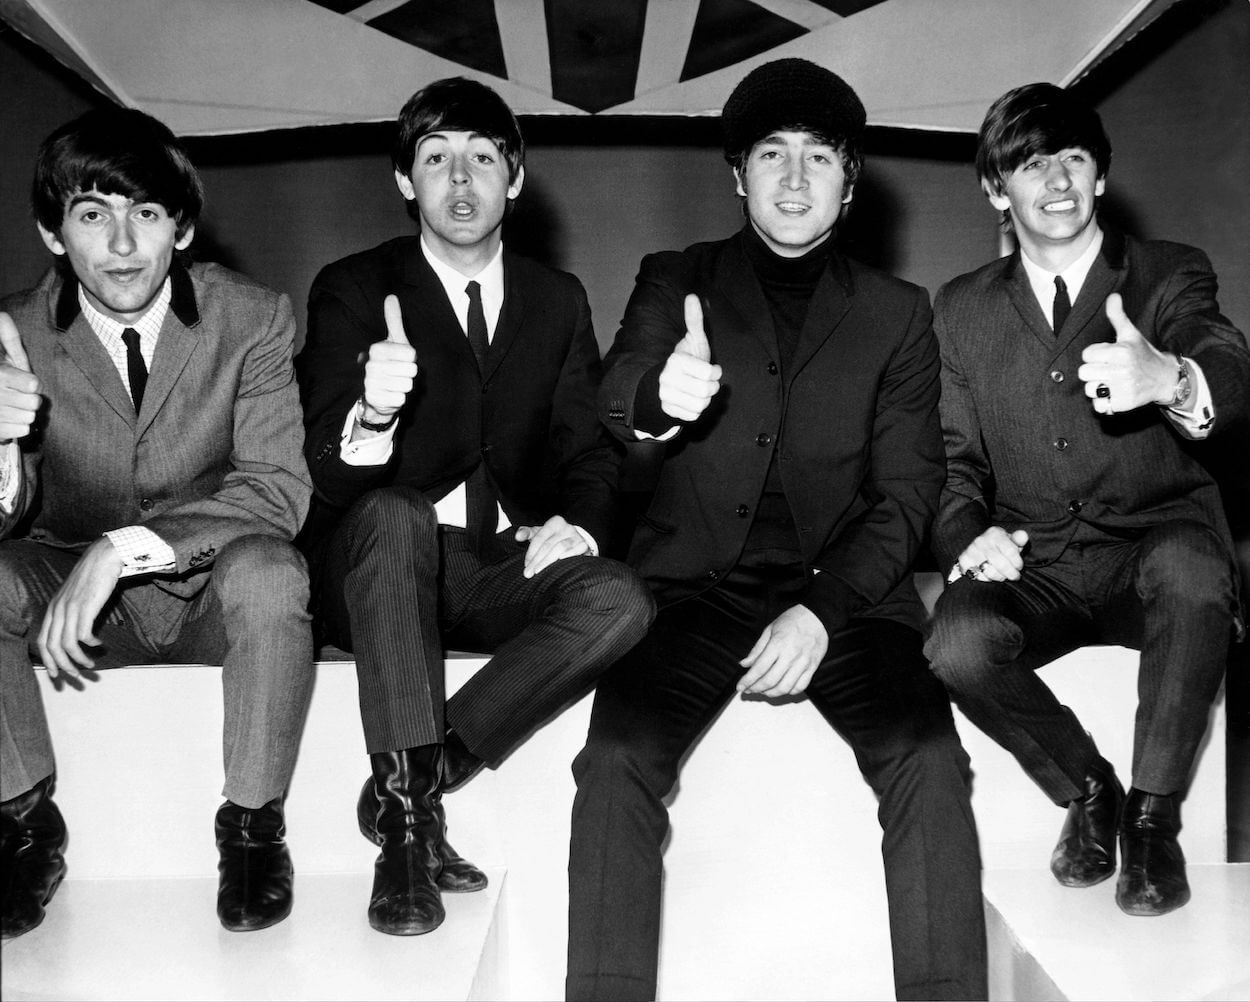 Beatles members (from left) George Harrison, Paul McCartney, John Lennon, and Ringo Starr wearing suits and giving thumbs up signs.